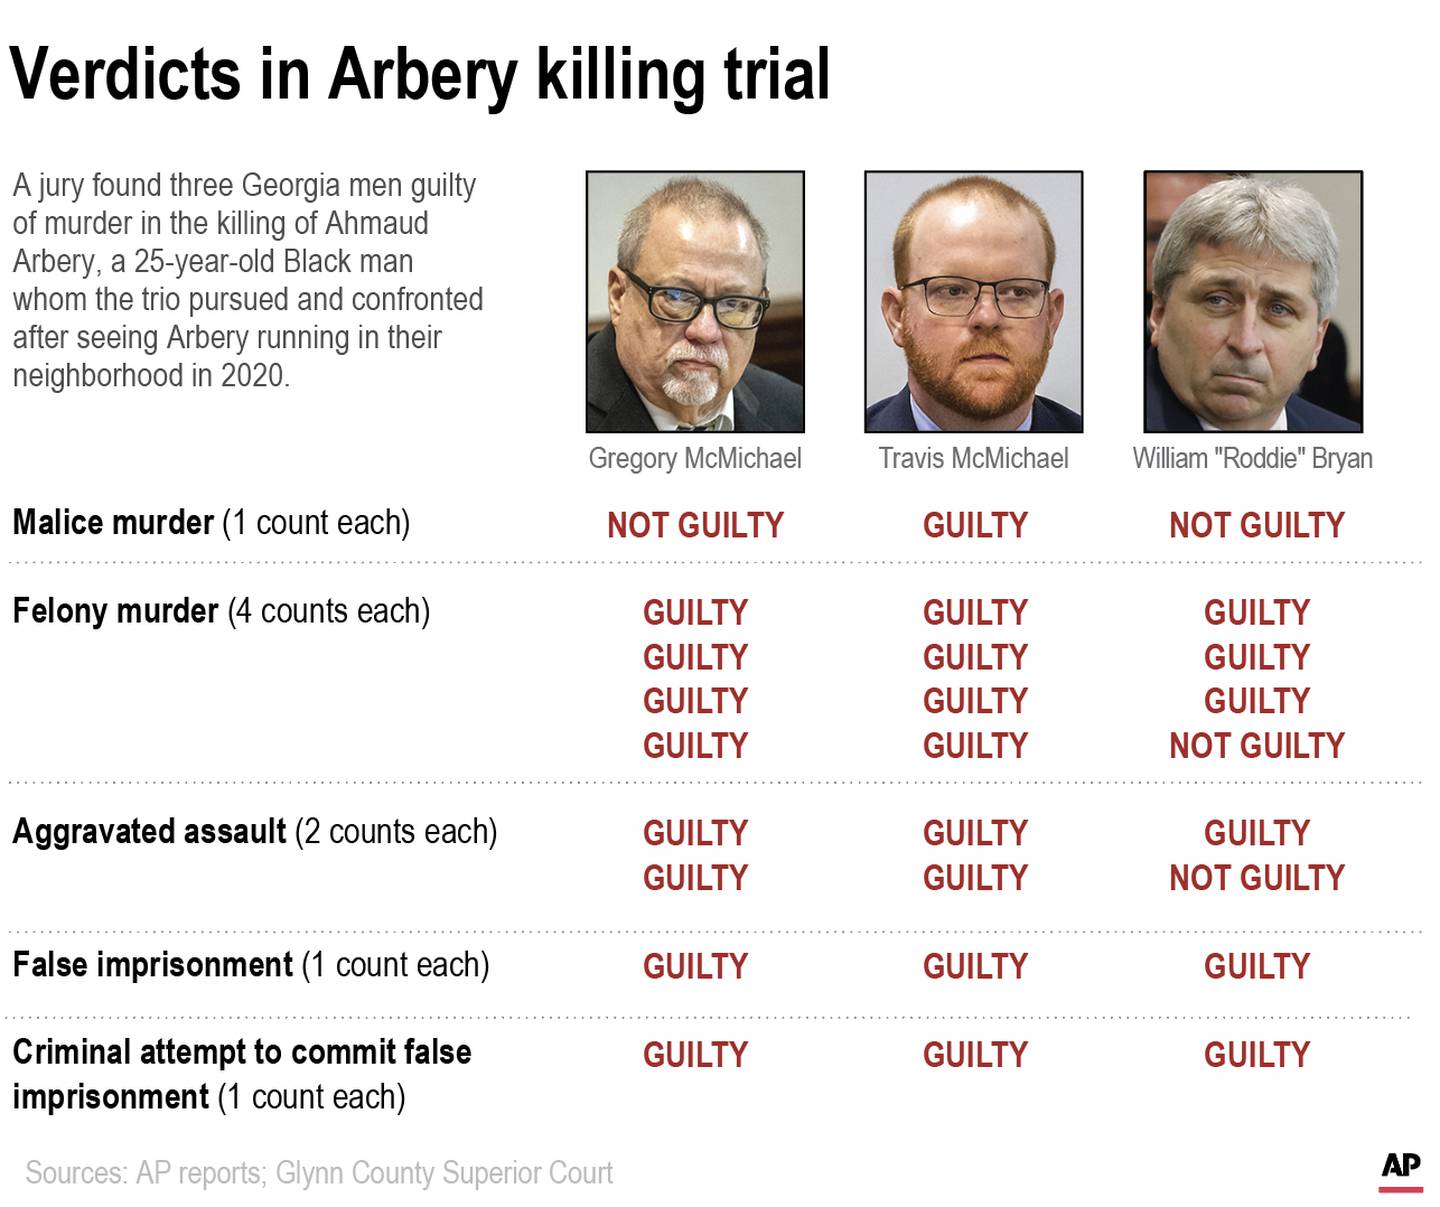 A jury found three Georgia men guilty of murder in the killing of Ahmaud Arbery, a 25-year-old black man whom the trio pursued and confronted after seeing Arbery running in their neighborhood in 2020. AP Graphic